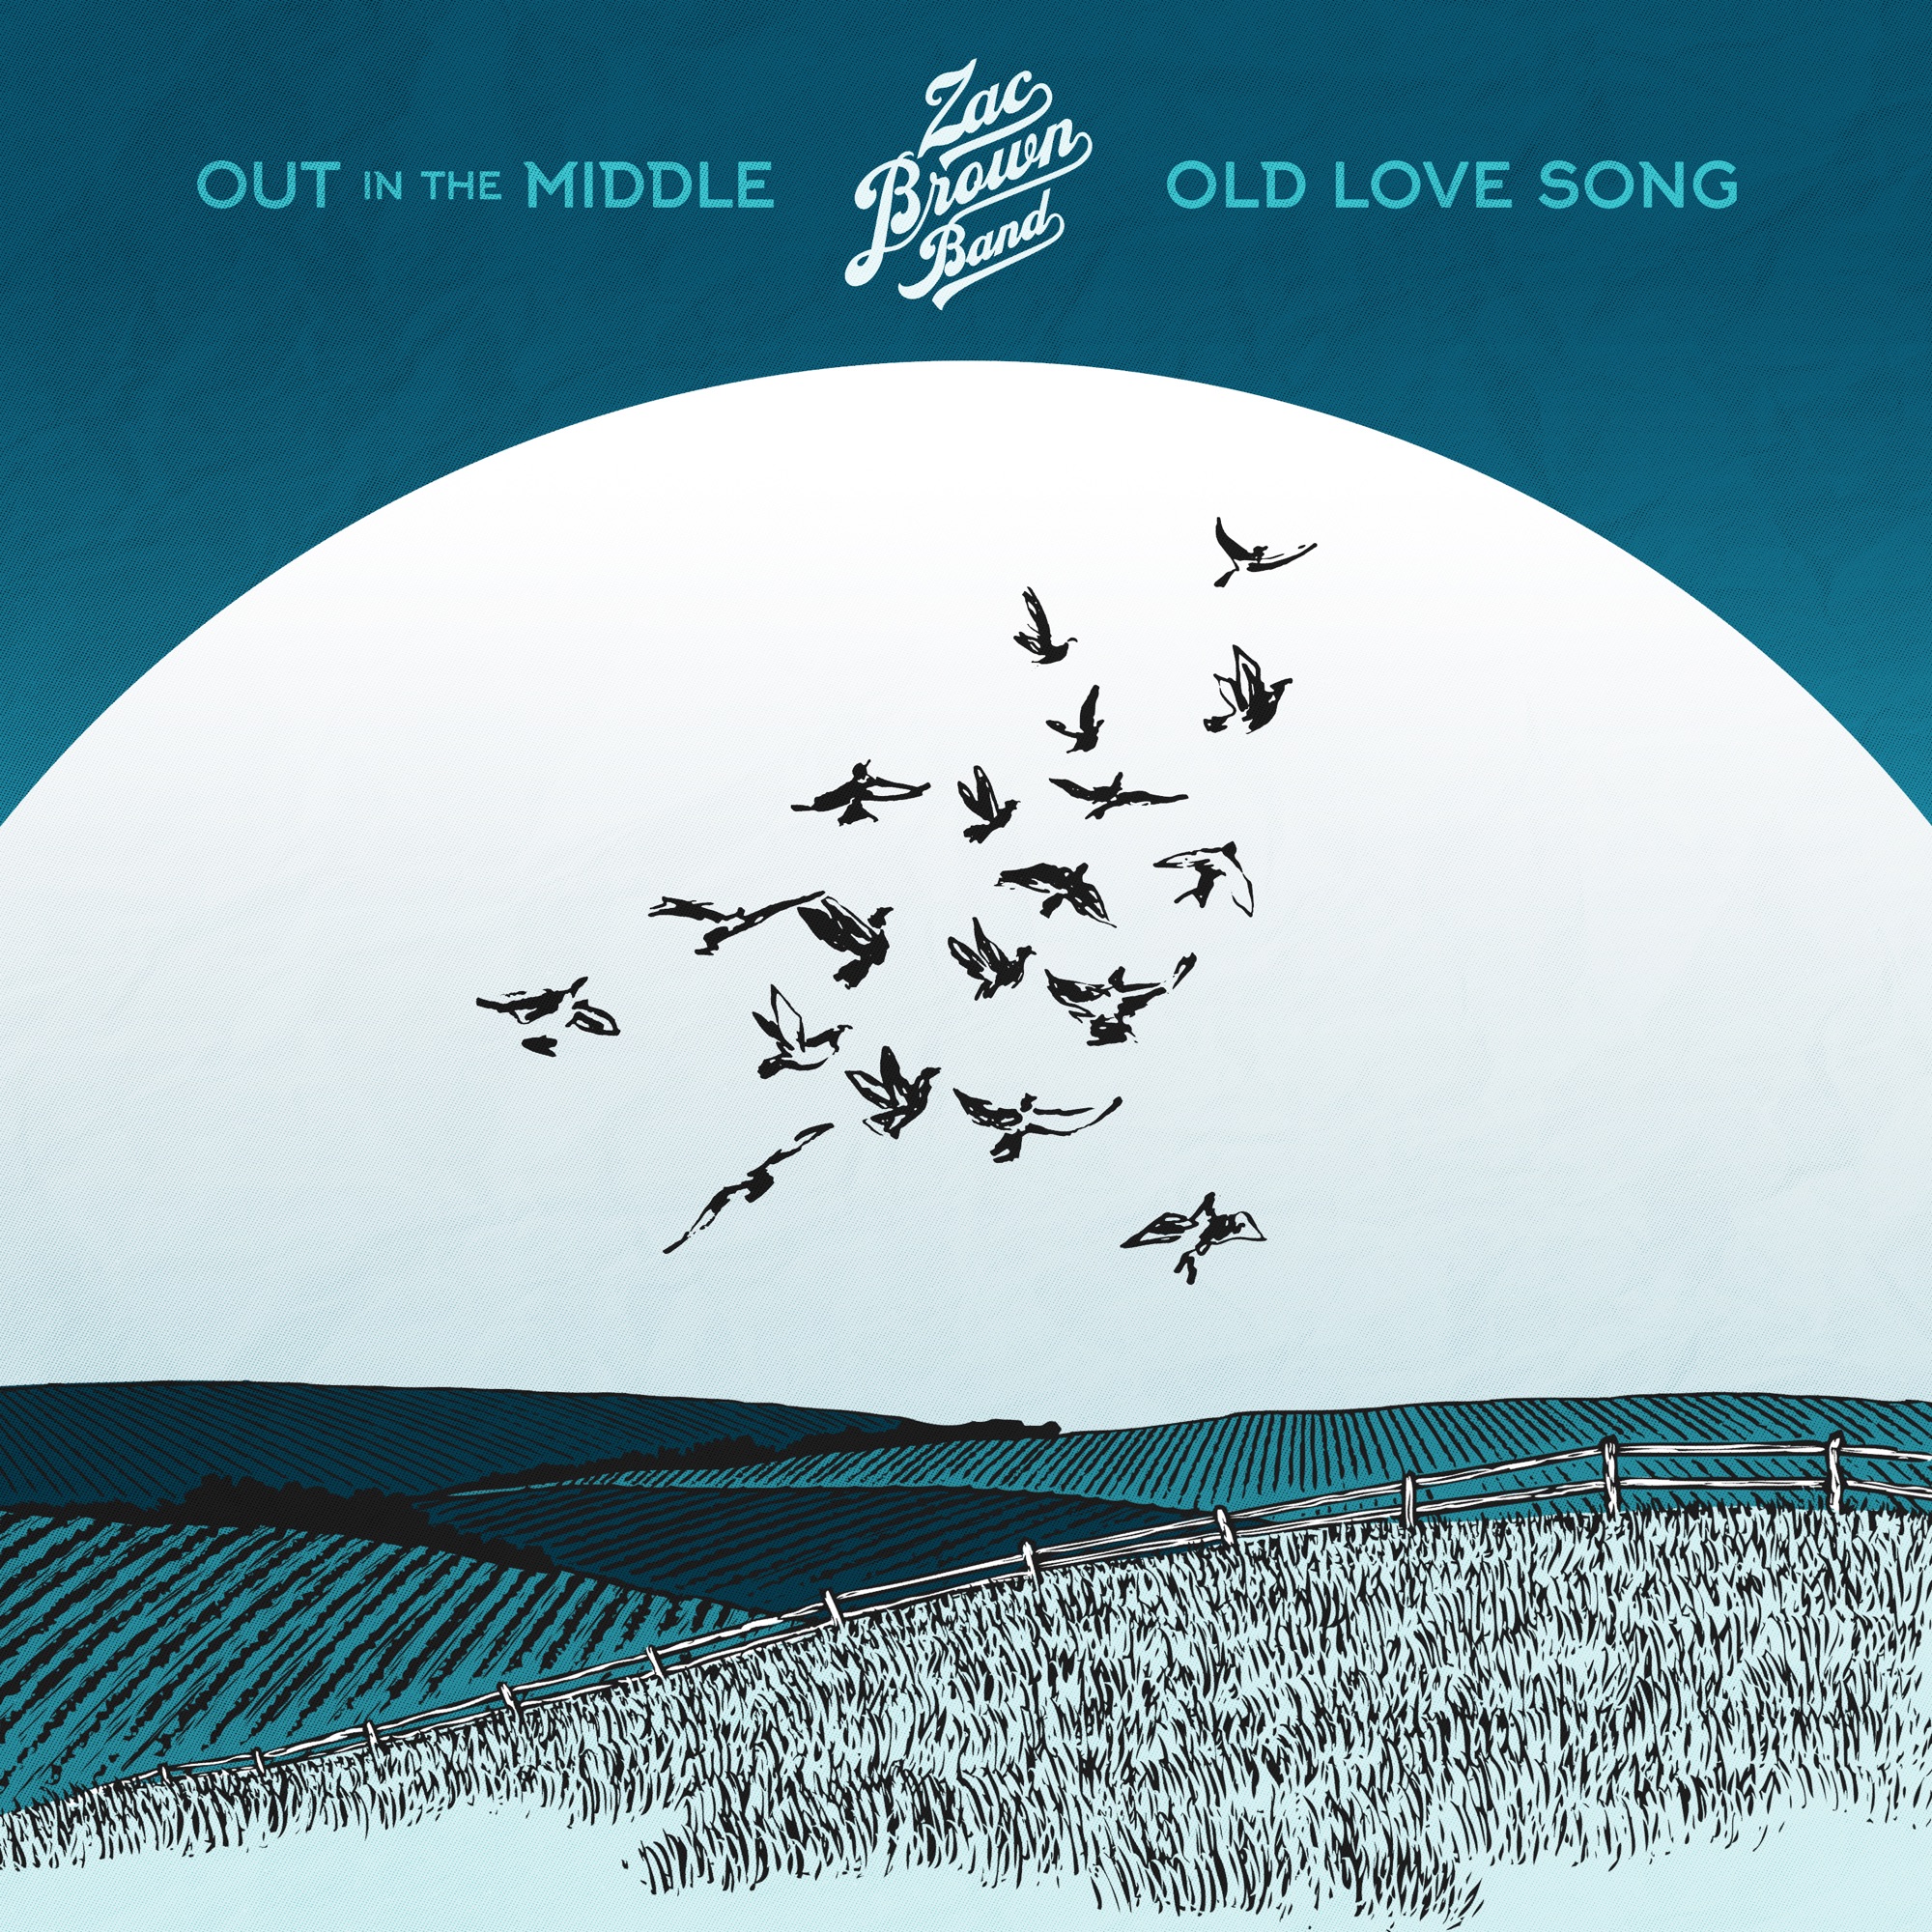 Zac Brown Band - Out in the Middle / Old Love Song - Single